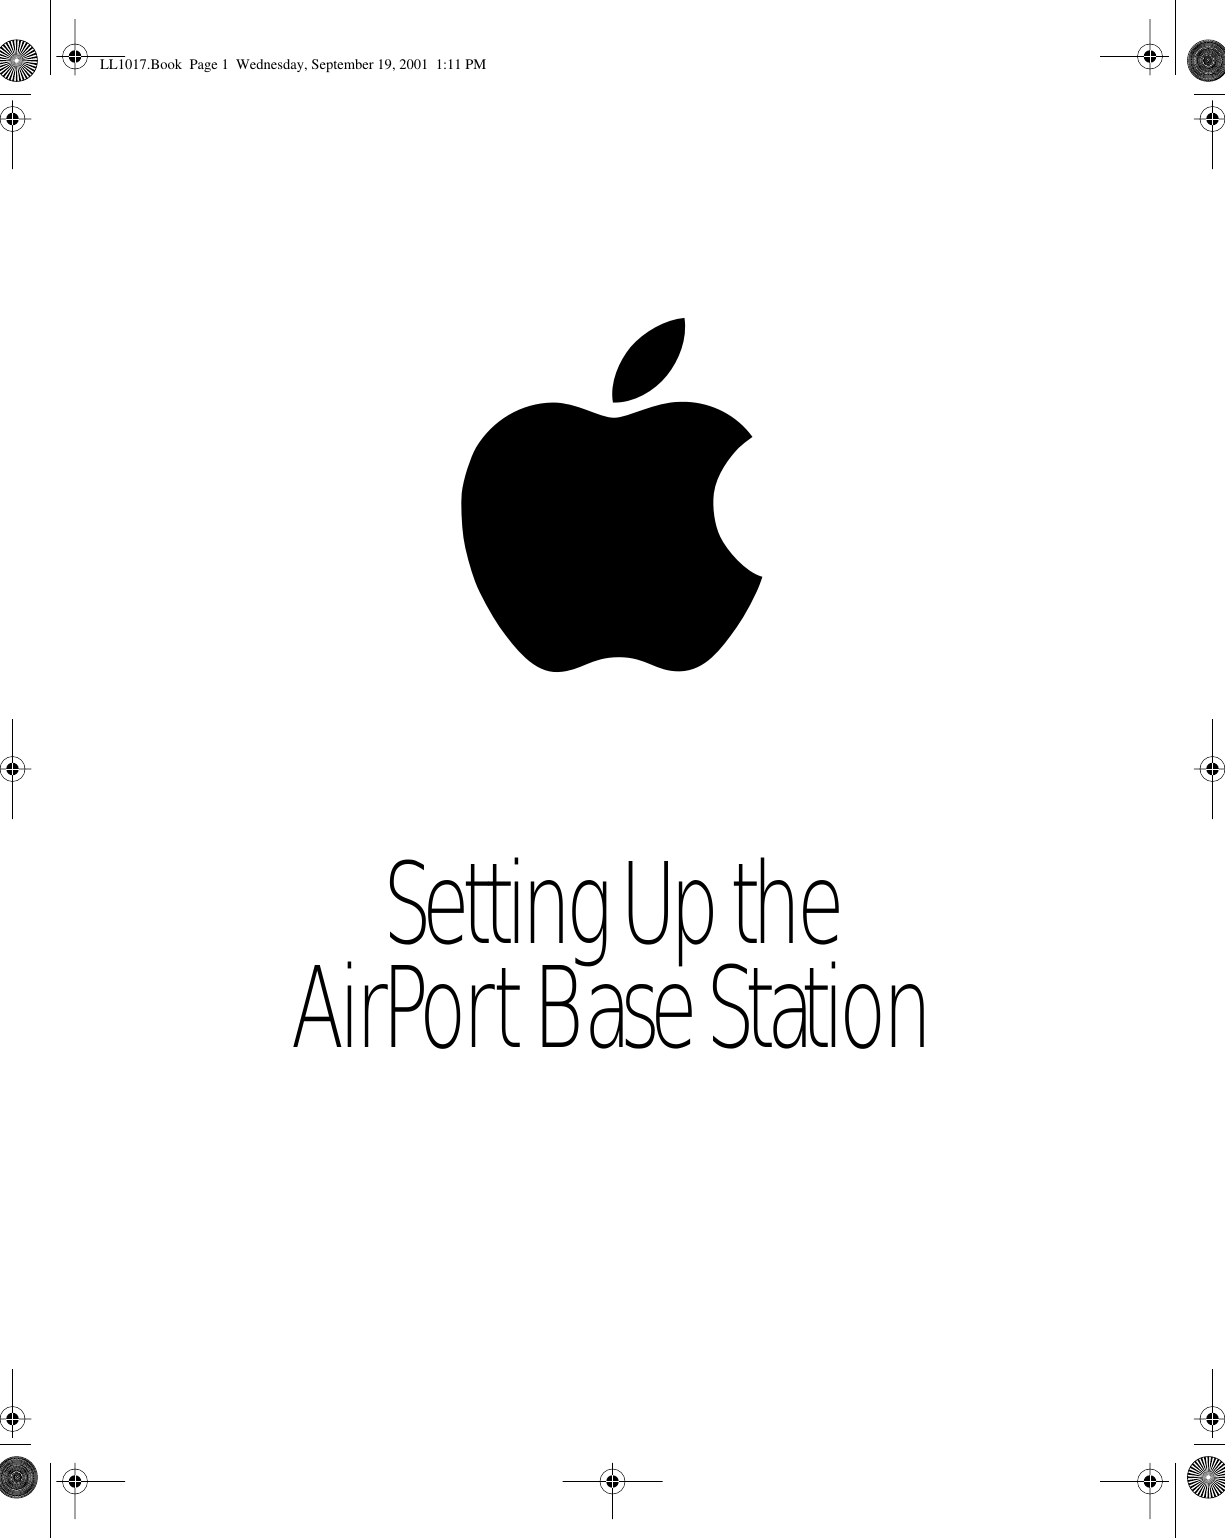   Setting Up the AirPort Base Station LL1017.Book  Page 1  Wednesday, September 19, 2001  1:11 PM